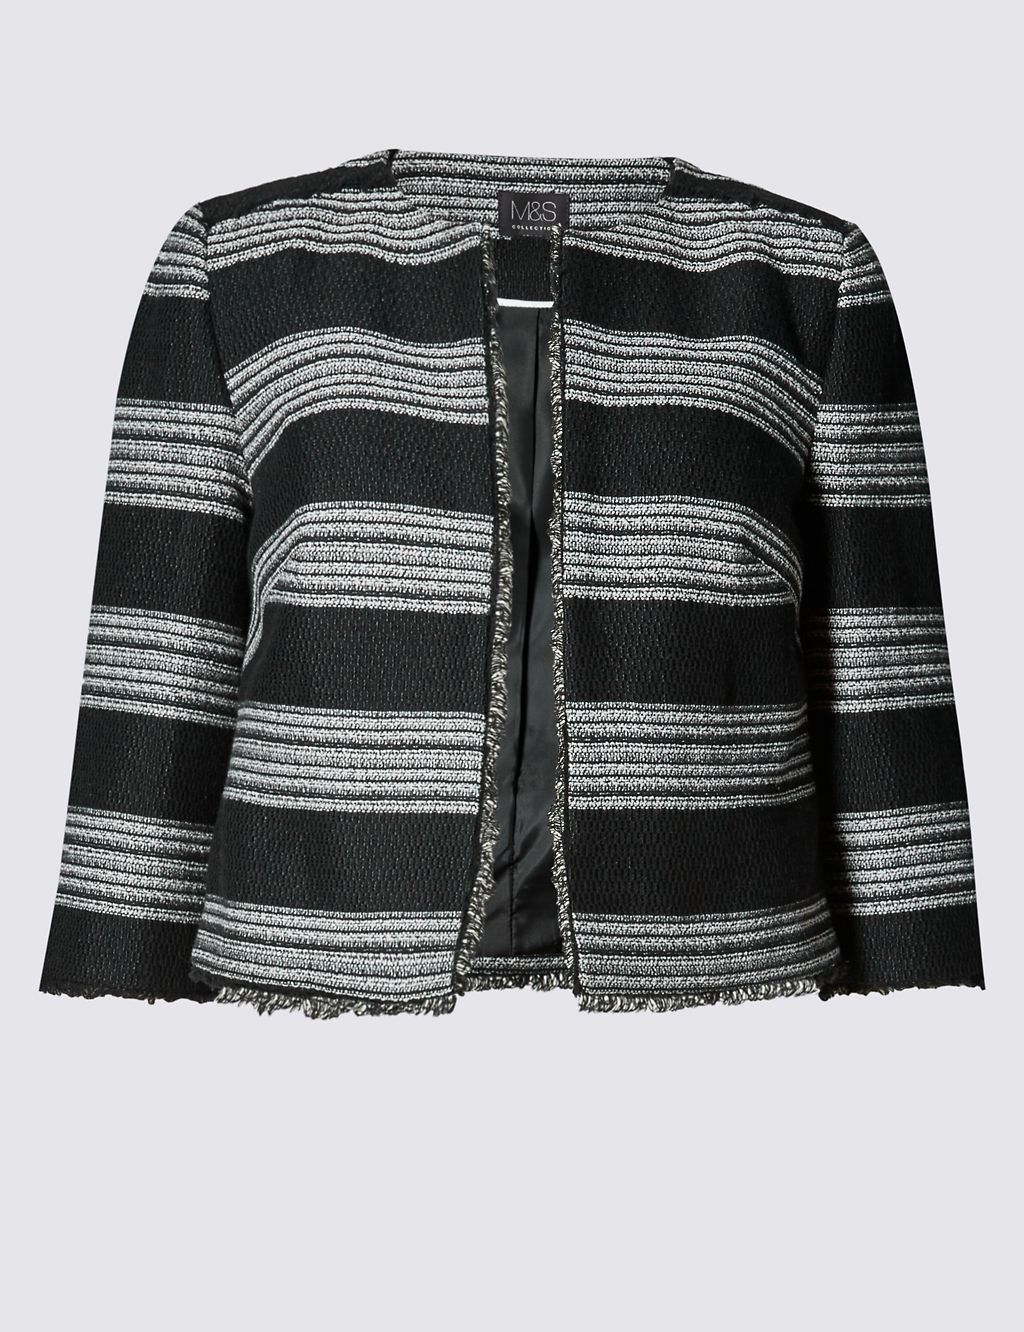 PETITE Textured Striped Open Front Jacket 1 of 3